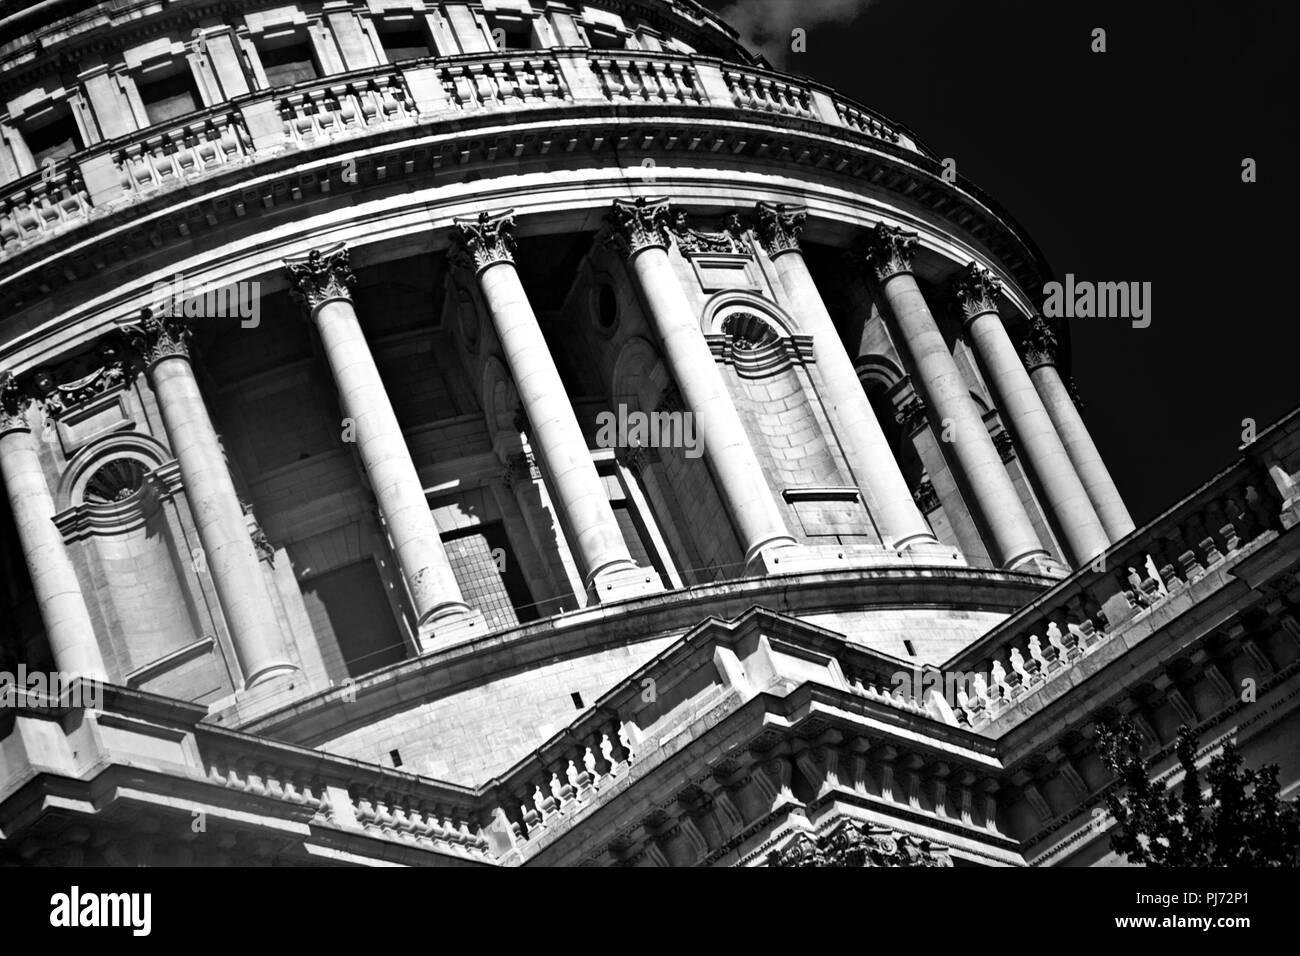 St Pauls Cathedral Stock Photo